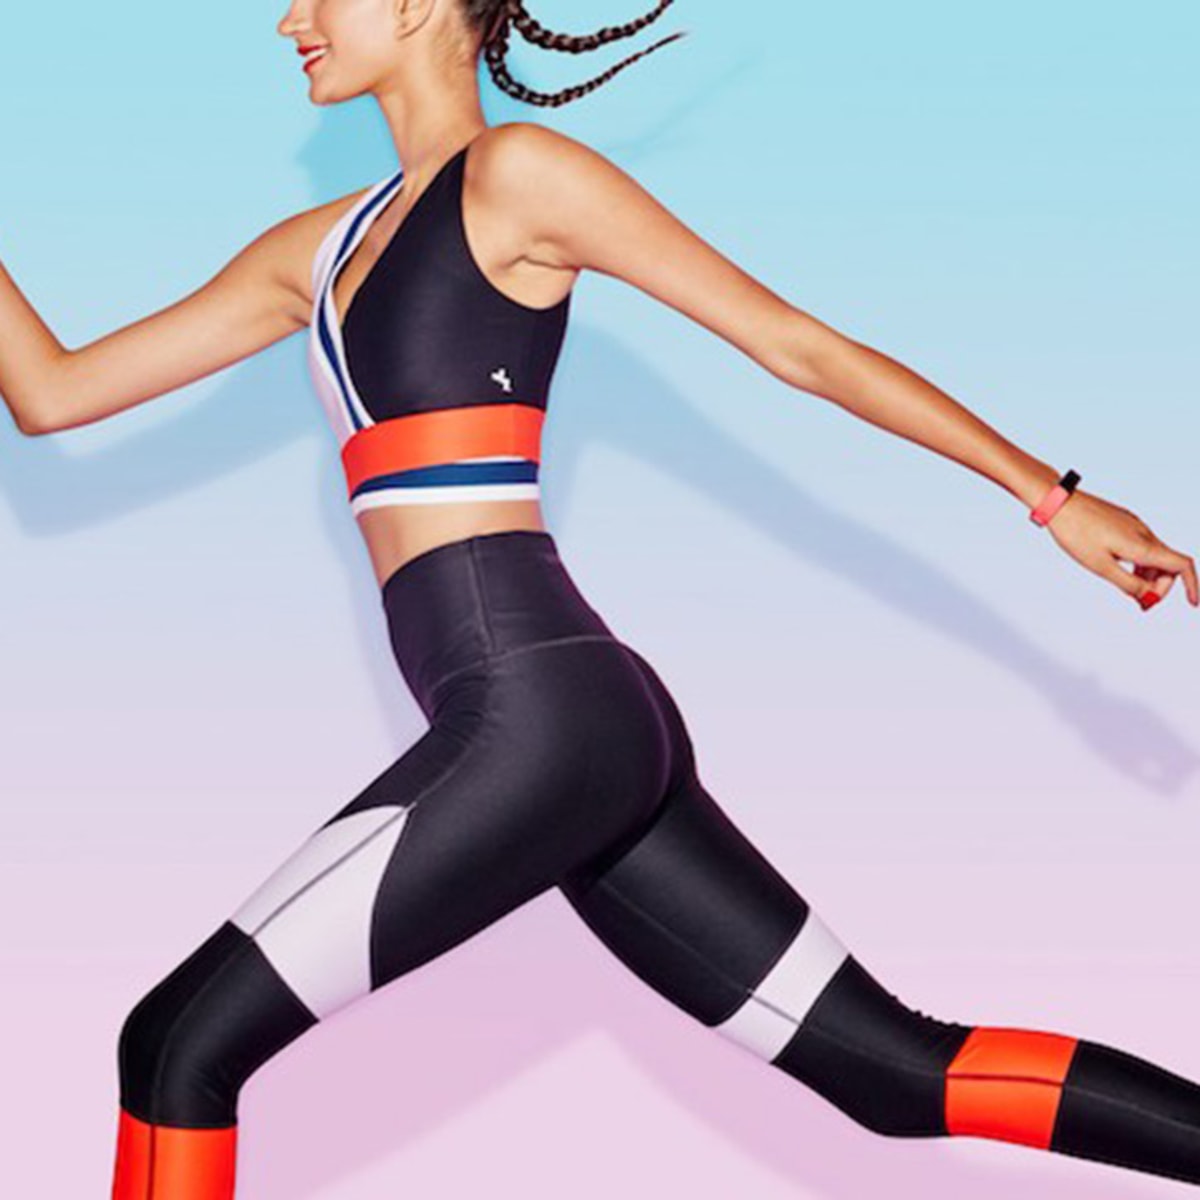 Target Launches Private Label Activewear Line